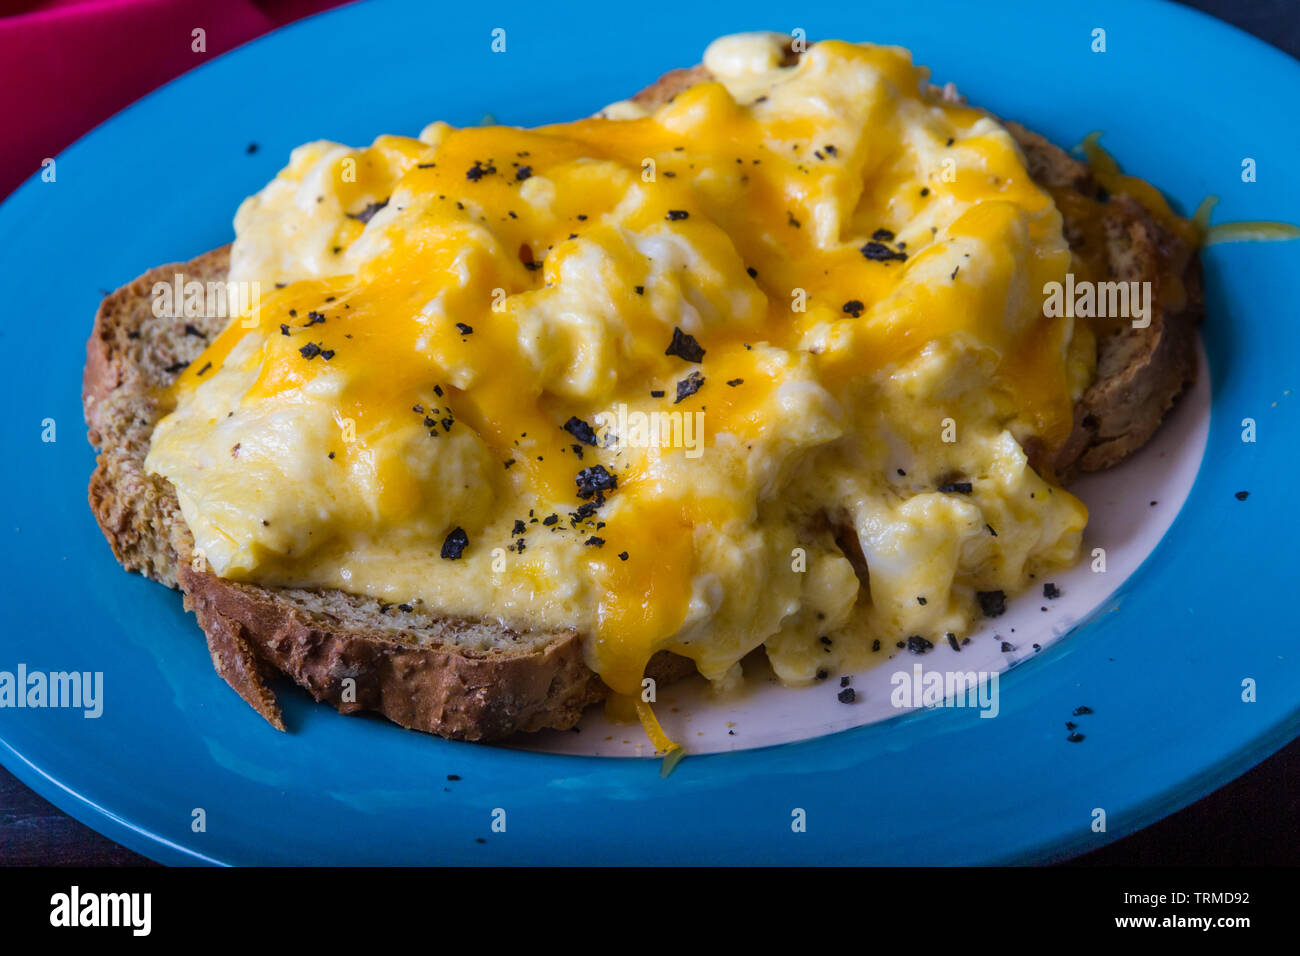 Scrambled Eggs With Melted Grated Cheese On Toast Breakfast Or Brunch Topped With Charcoal Salt Stock Photo Alamy